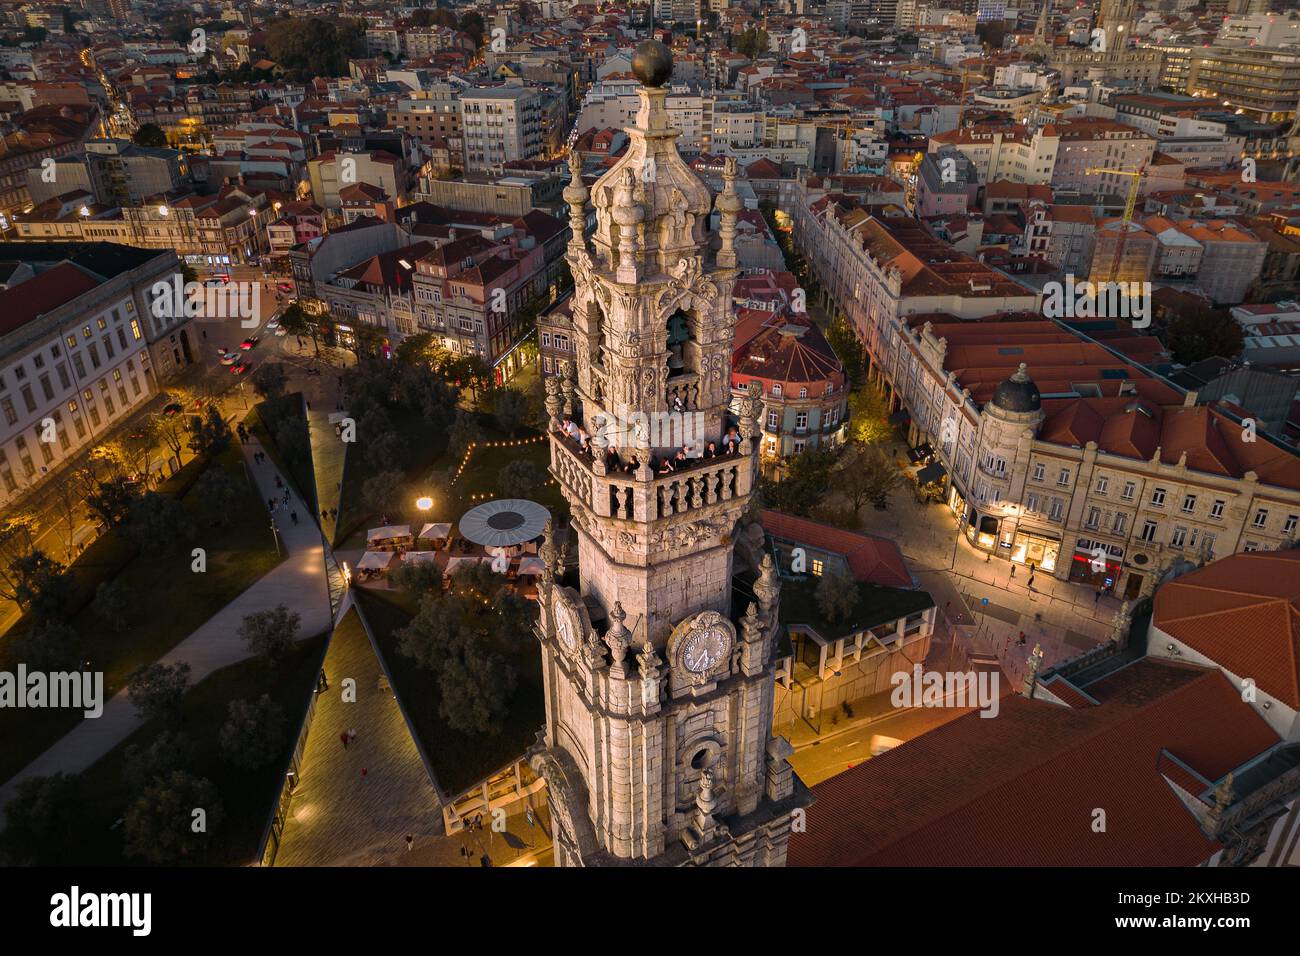 Aerial view of the 18th-century Clerigos Tower (Portuguese: Torre dos Clerigos) at dusk in Porto (Oporto), Portugal. Stock Photo